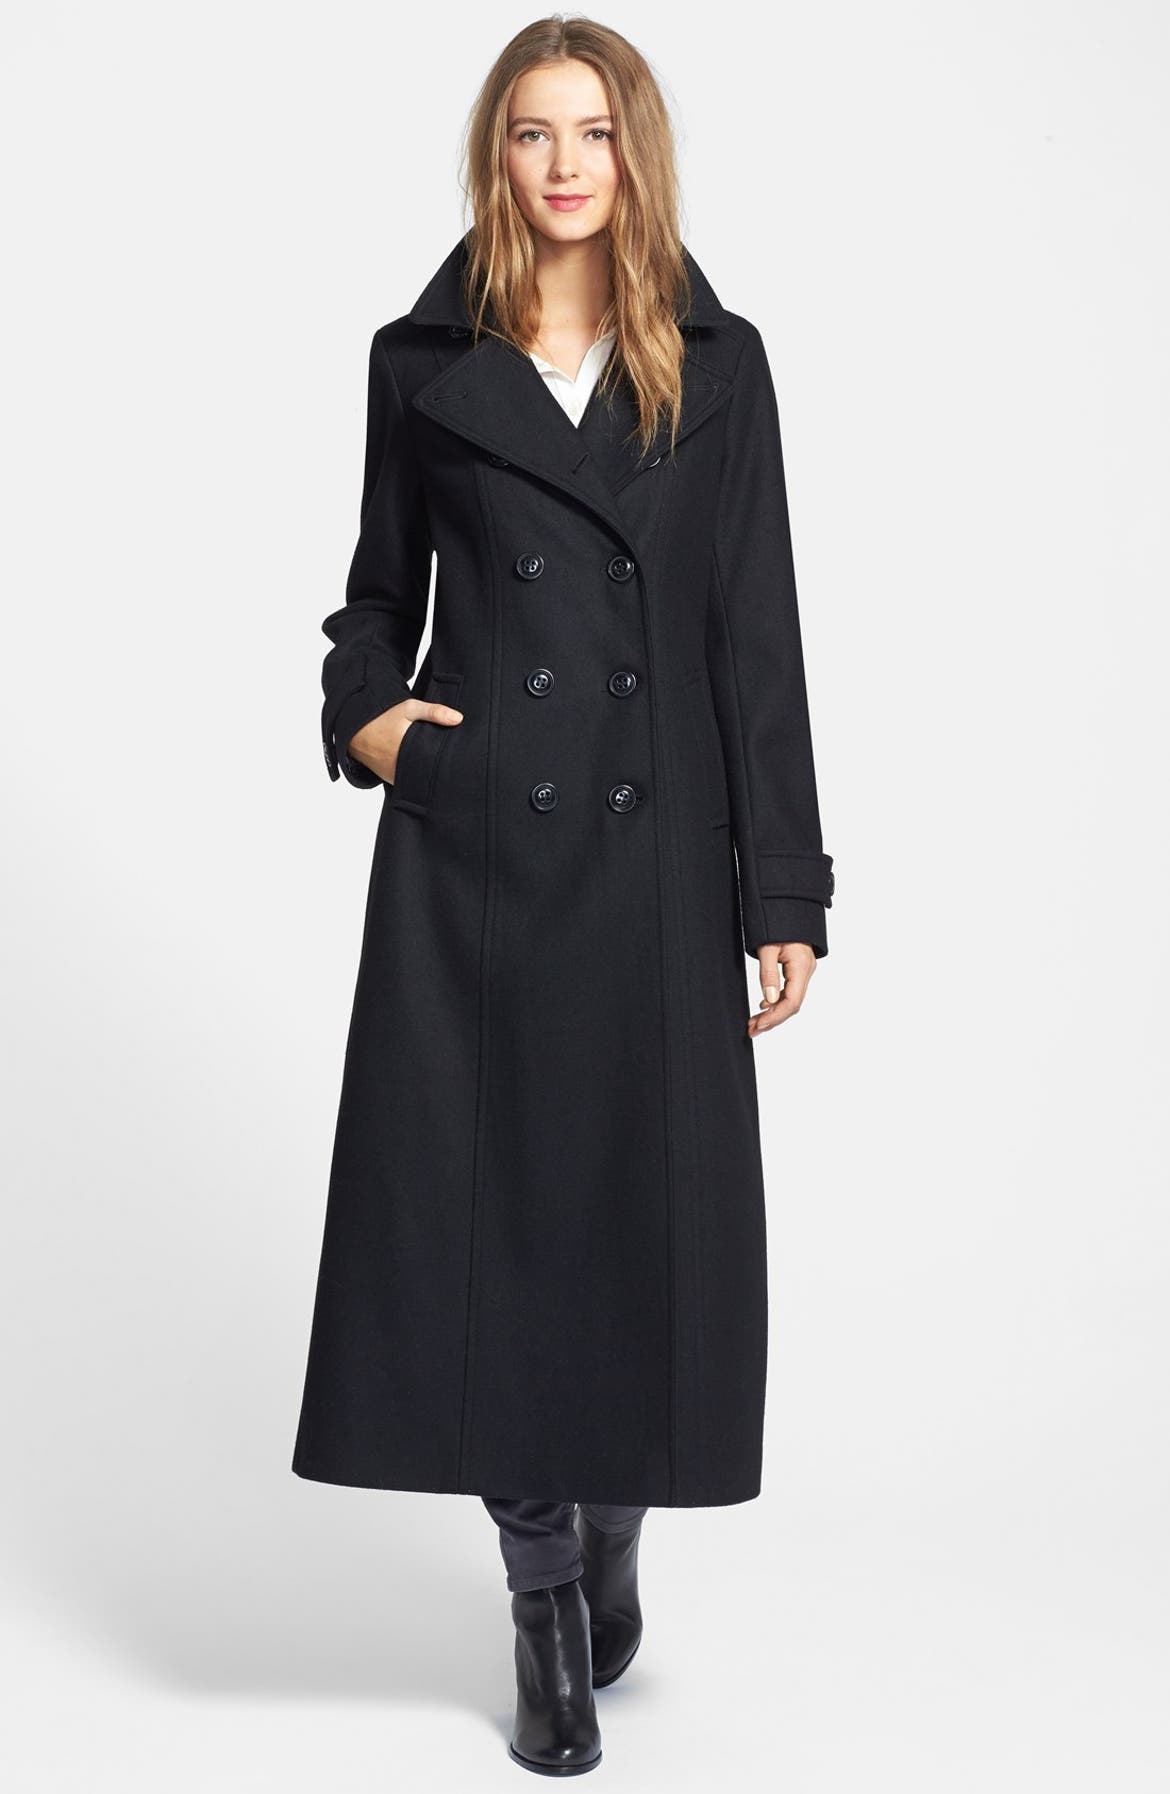 DKNY Double Breasted Long Wool Blend Coat | Nordstrom